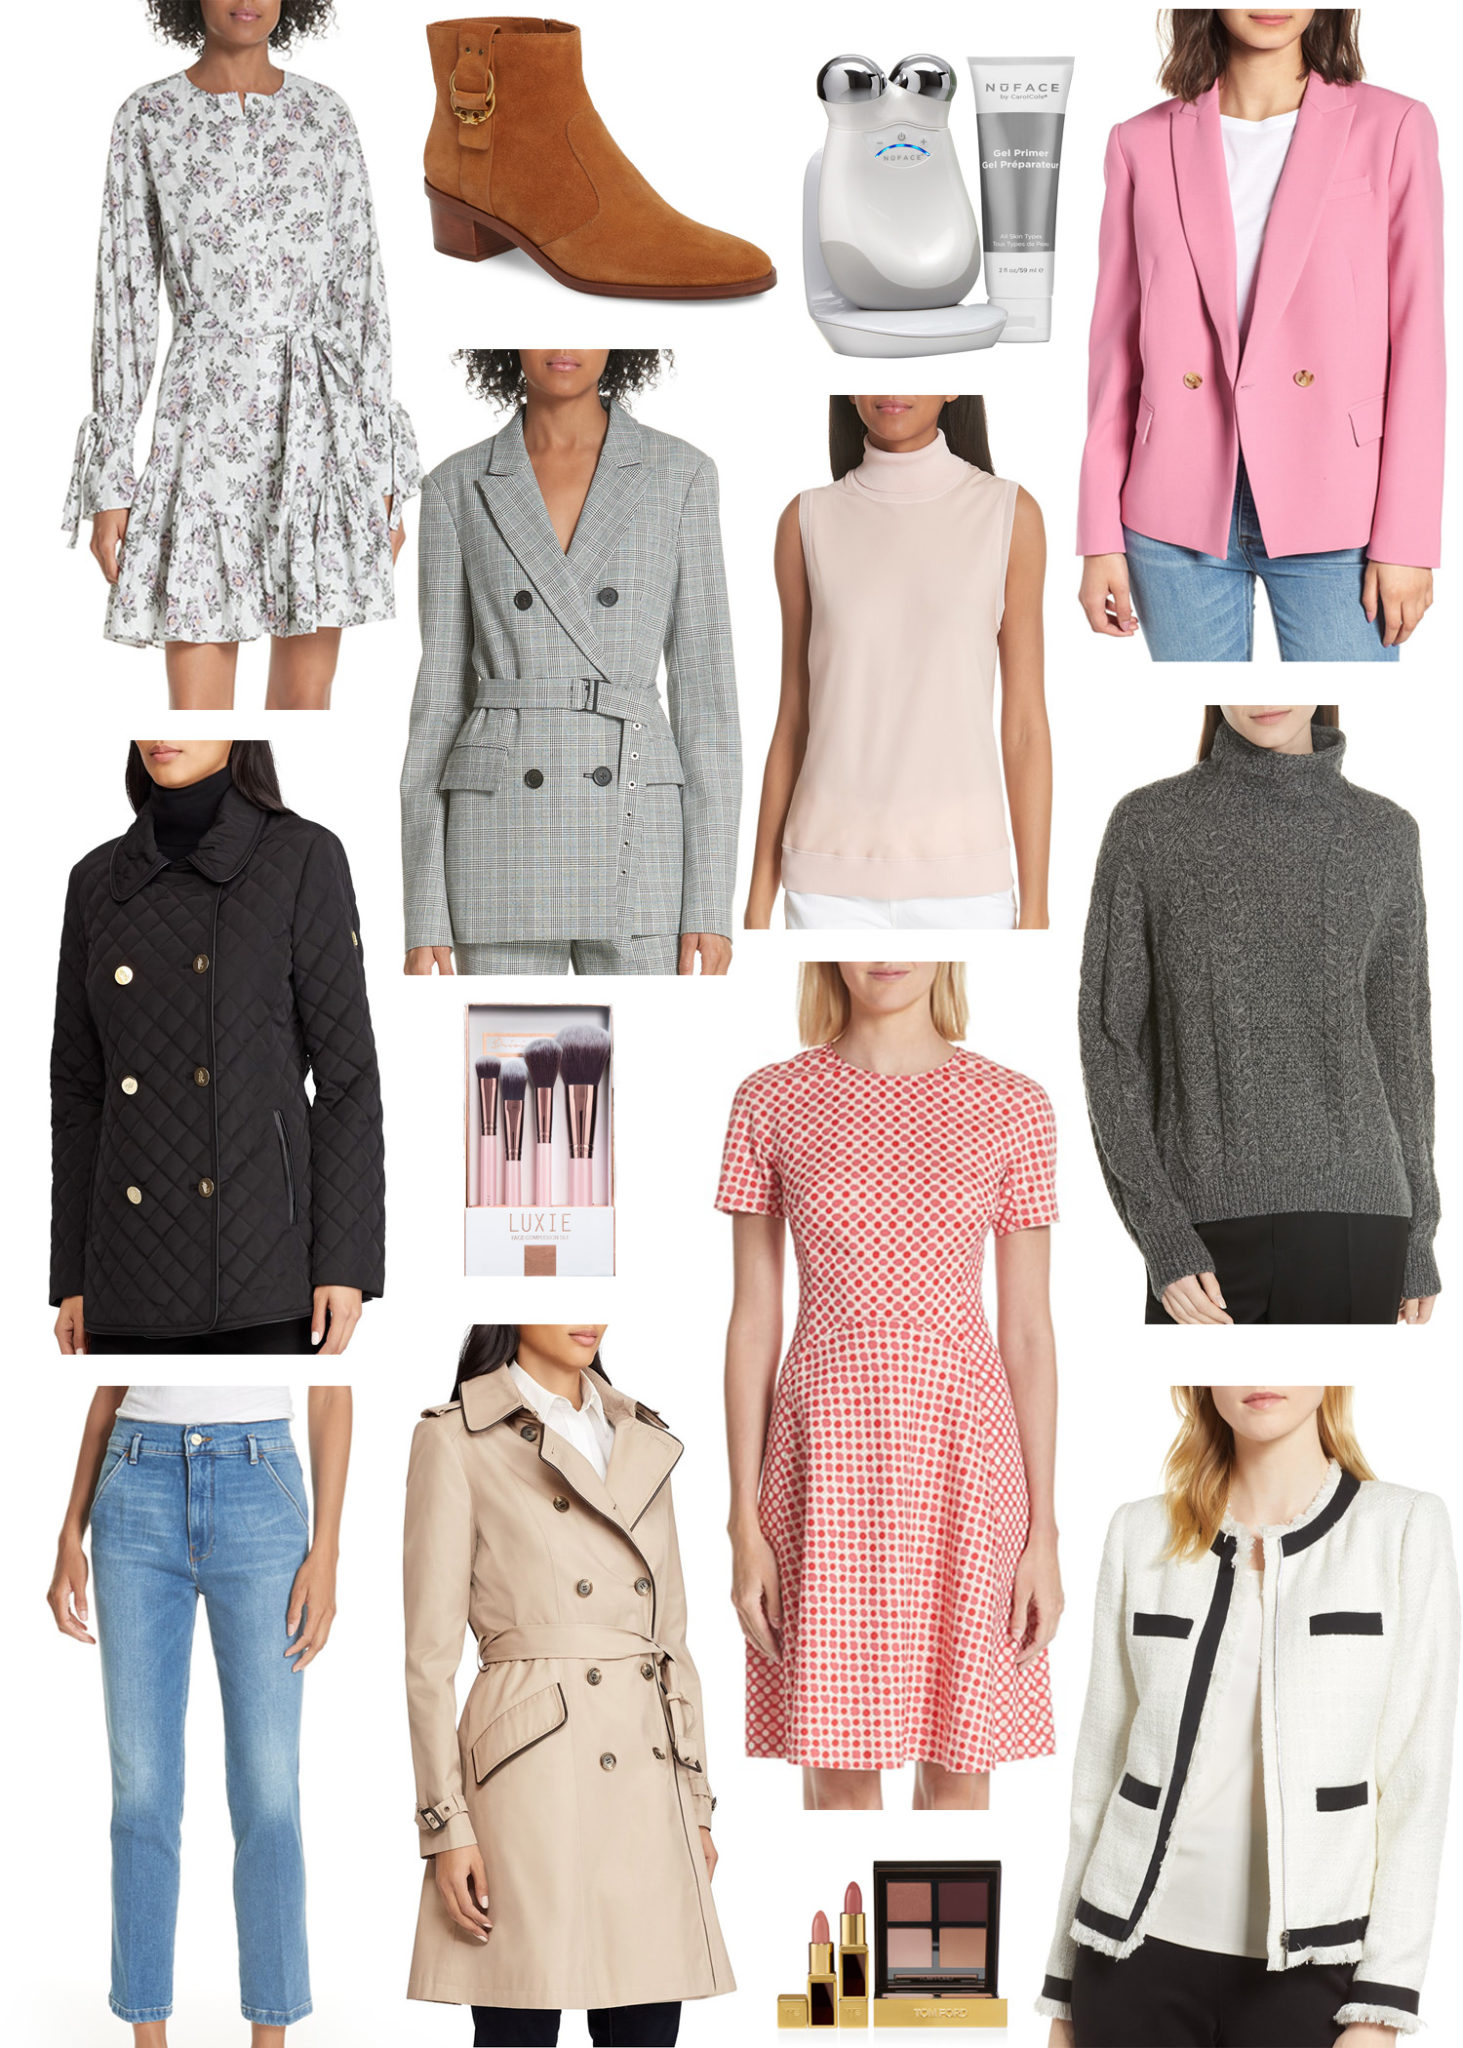 nordstrom early access sale